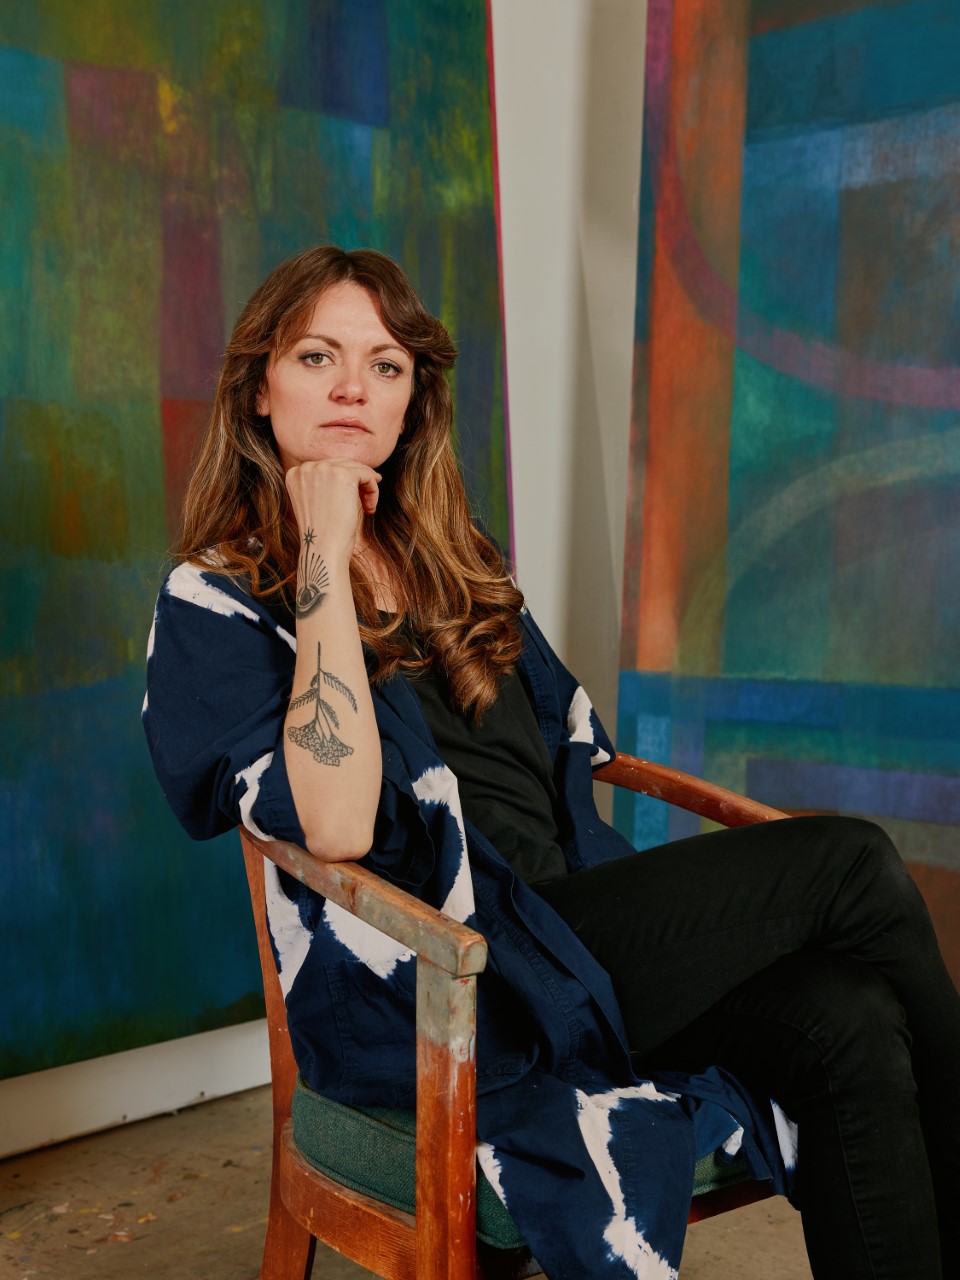 Maja Ruznic seated in chair in front of large artworks